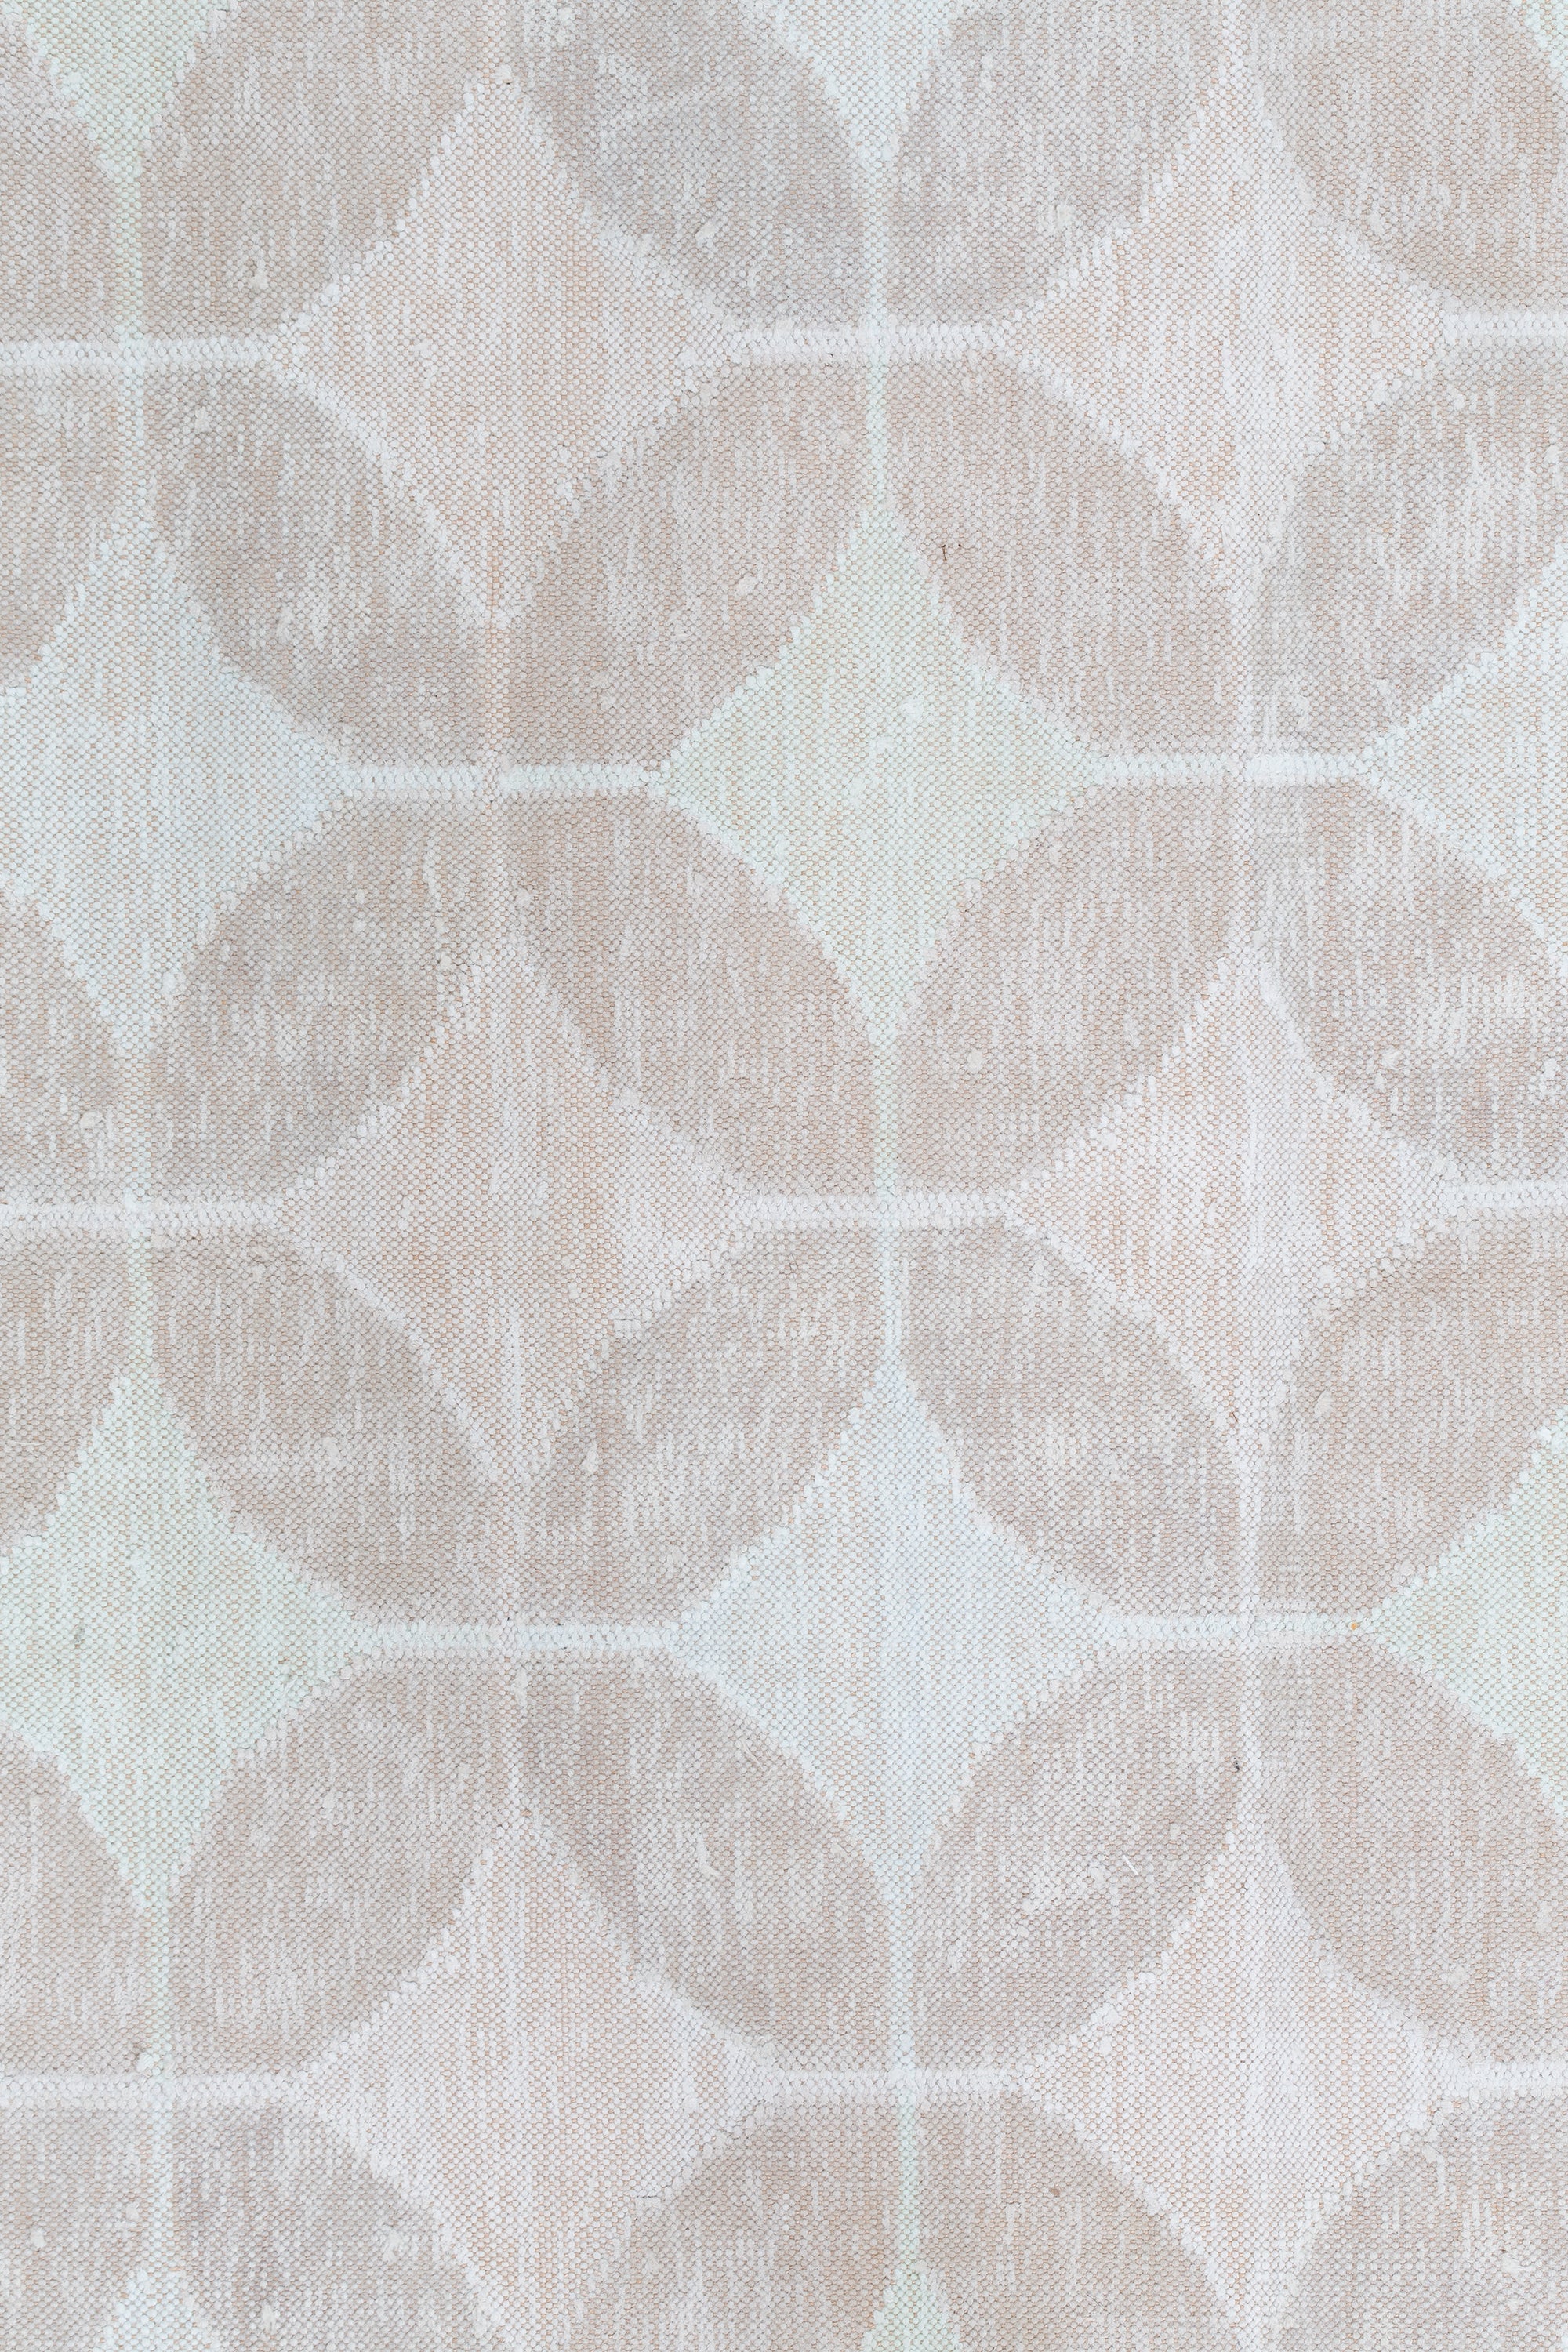 Detail of Alhambra Rug in Stonewash featuring pattern of linked circles that create a star like lattice in a range of pale pink tones a soft white field. 